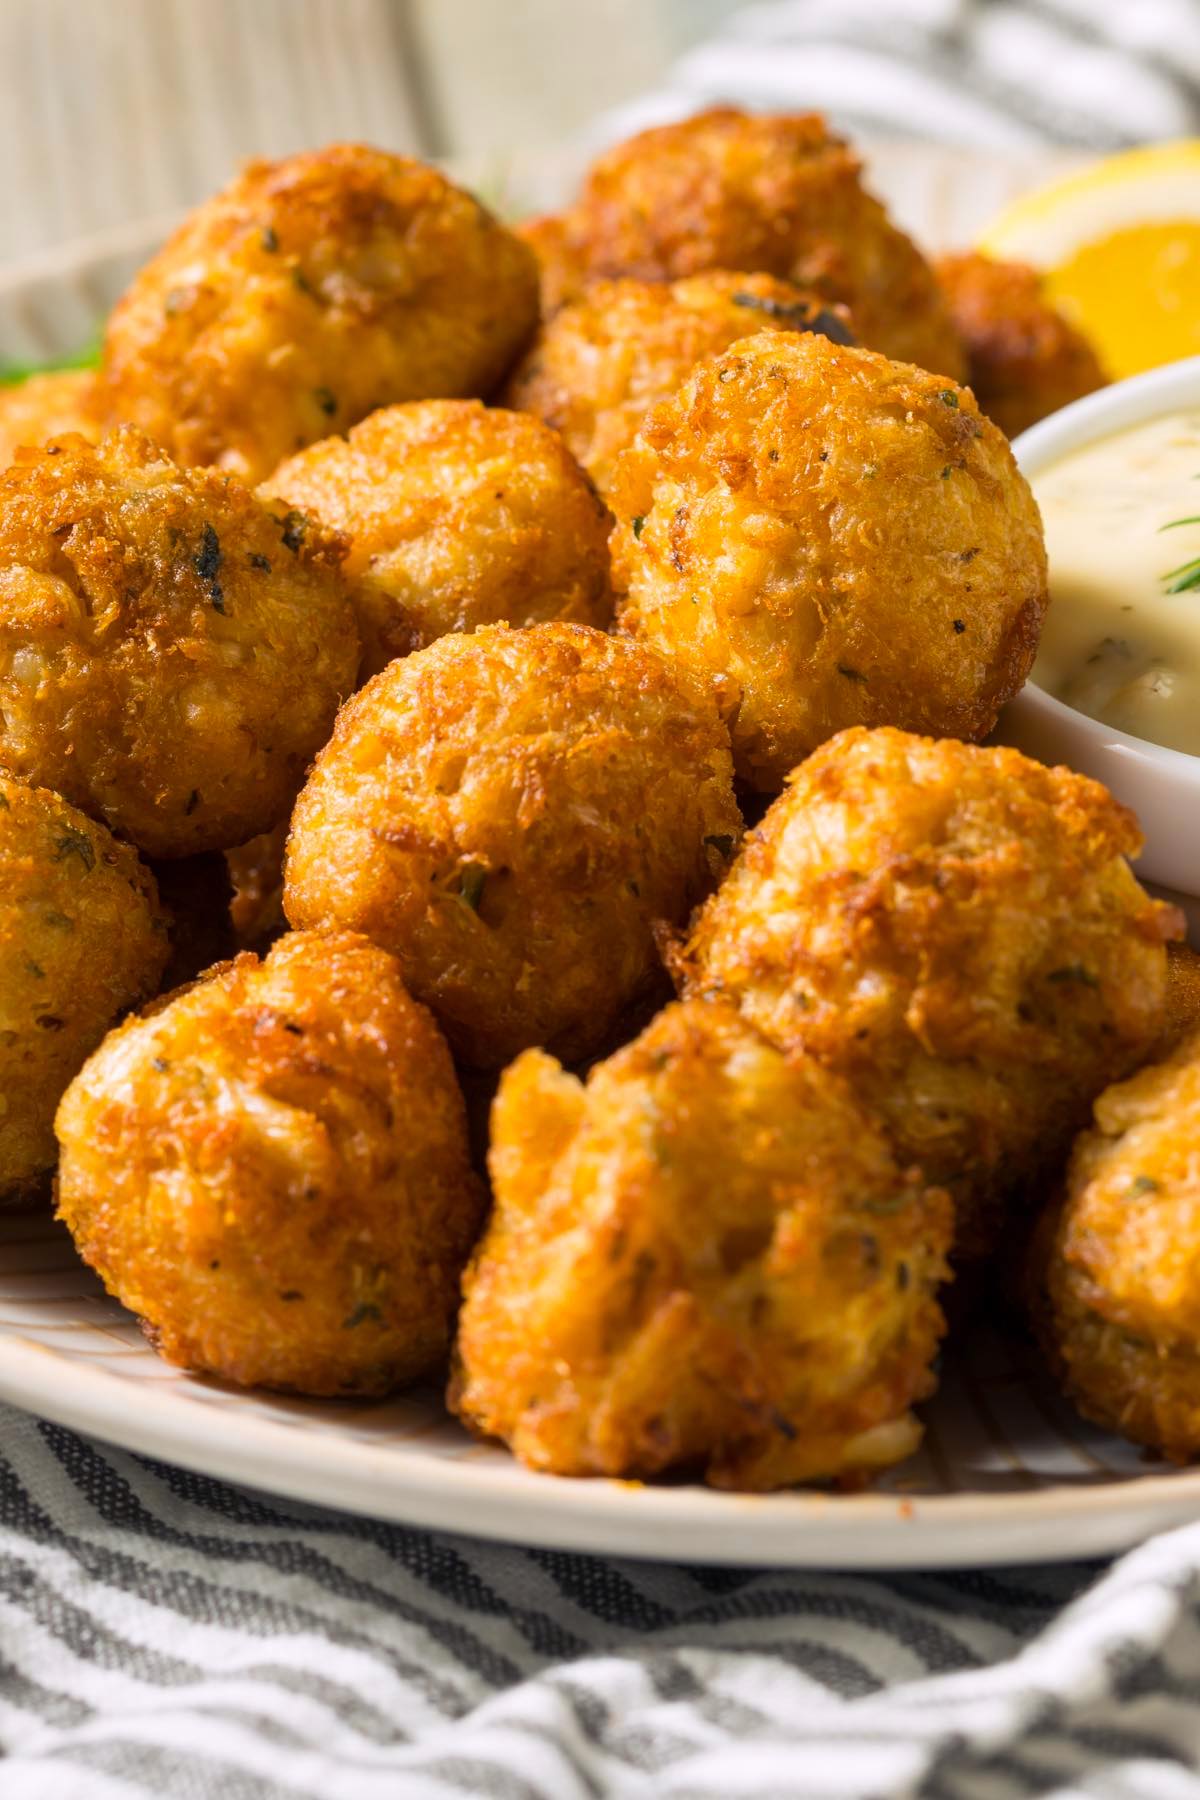 Homemade baked Crab Balls are delicious mini crab cake bites made with high-quality crab meat. This recipe is easy to prepare and makes tasty hors d'oeuvres or can be used as protein in a salad or wrap.